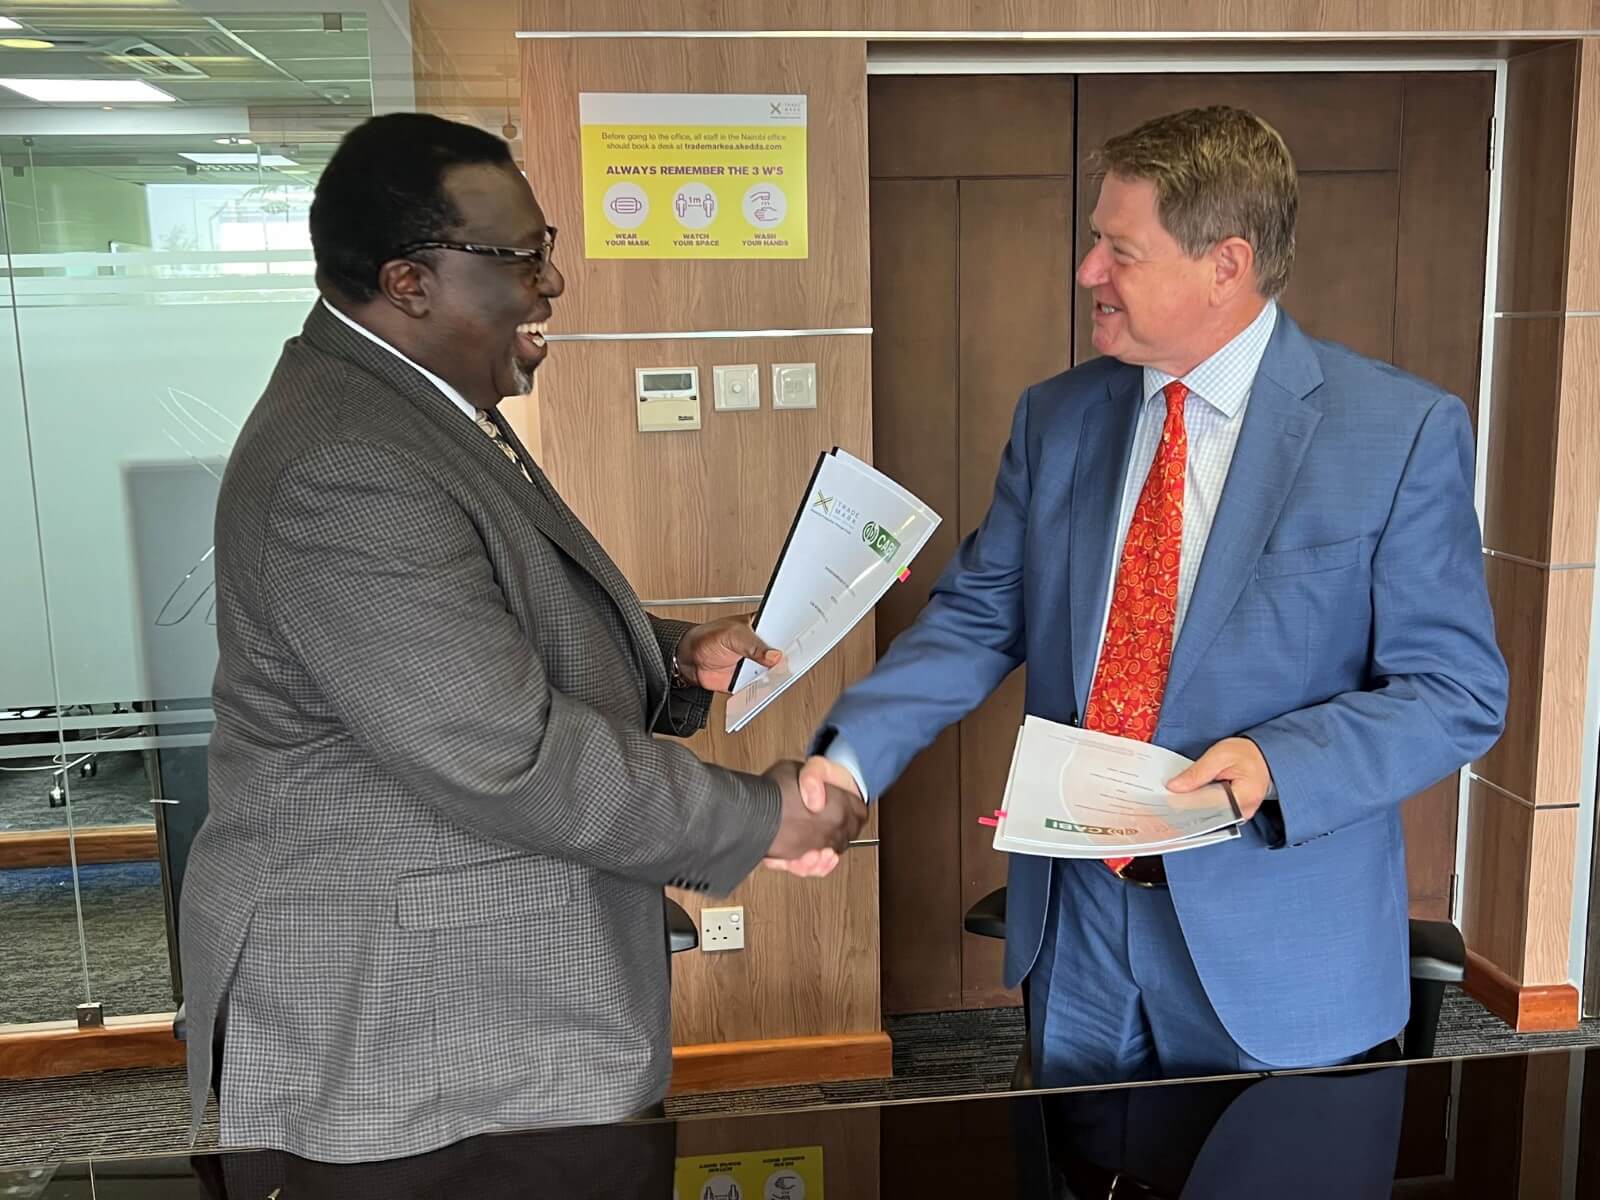 TradeMark Africa (TMA) and Centre for Agricultural and Bioscience International (CABI) Sign Memorandum of Understanding (MoU) to support Standards, Sanitary & Phyto-Sanitary work in Trade